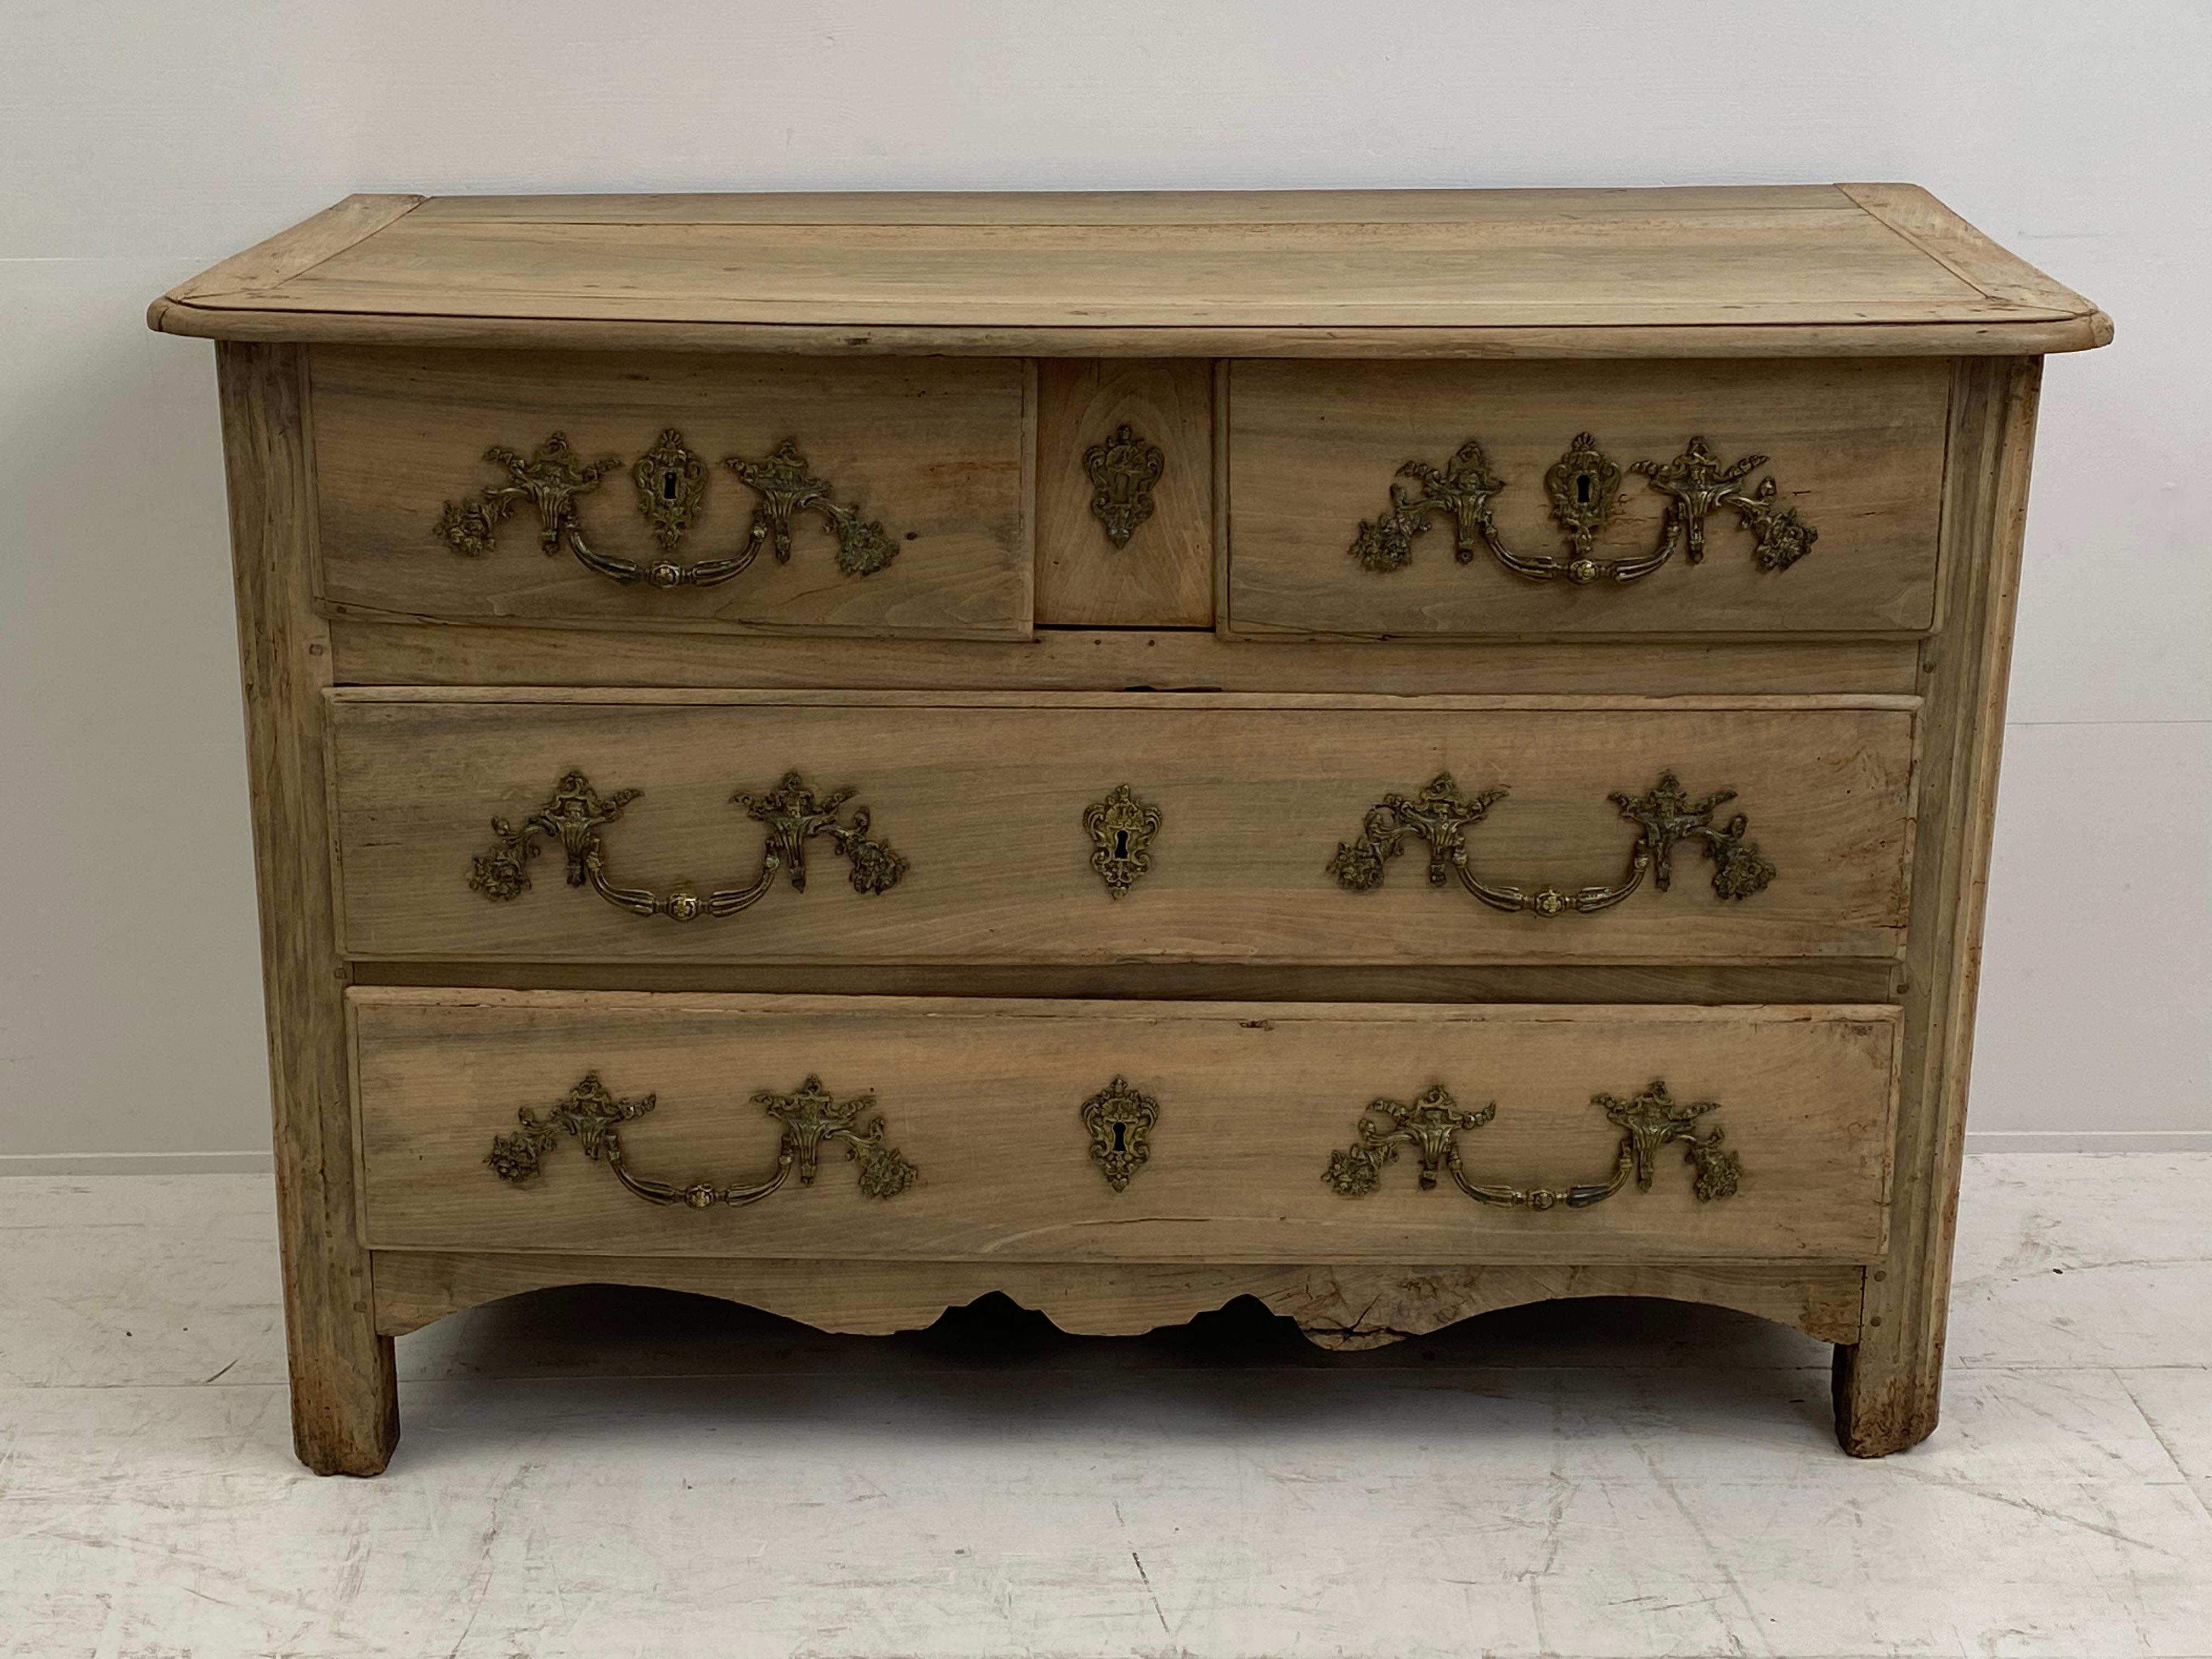 Elegant French Commode in a bleached Walnut,
from the Paris Region,18 th Century,
original Bronze Handles,
3 big drawers and 2 small drawers,
excellent antique patina and warm wear of the wood,
very elegant and decorative classical commode.